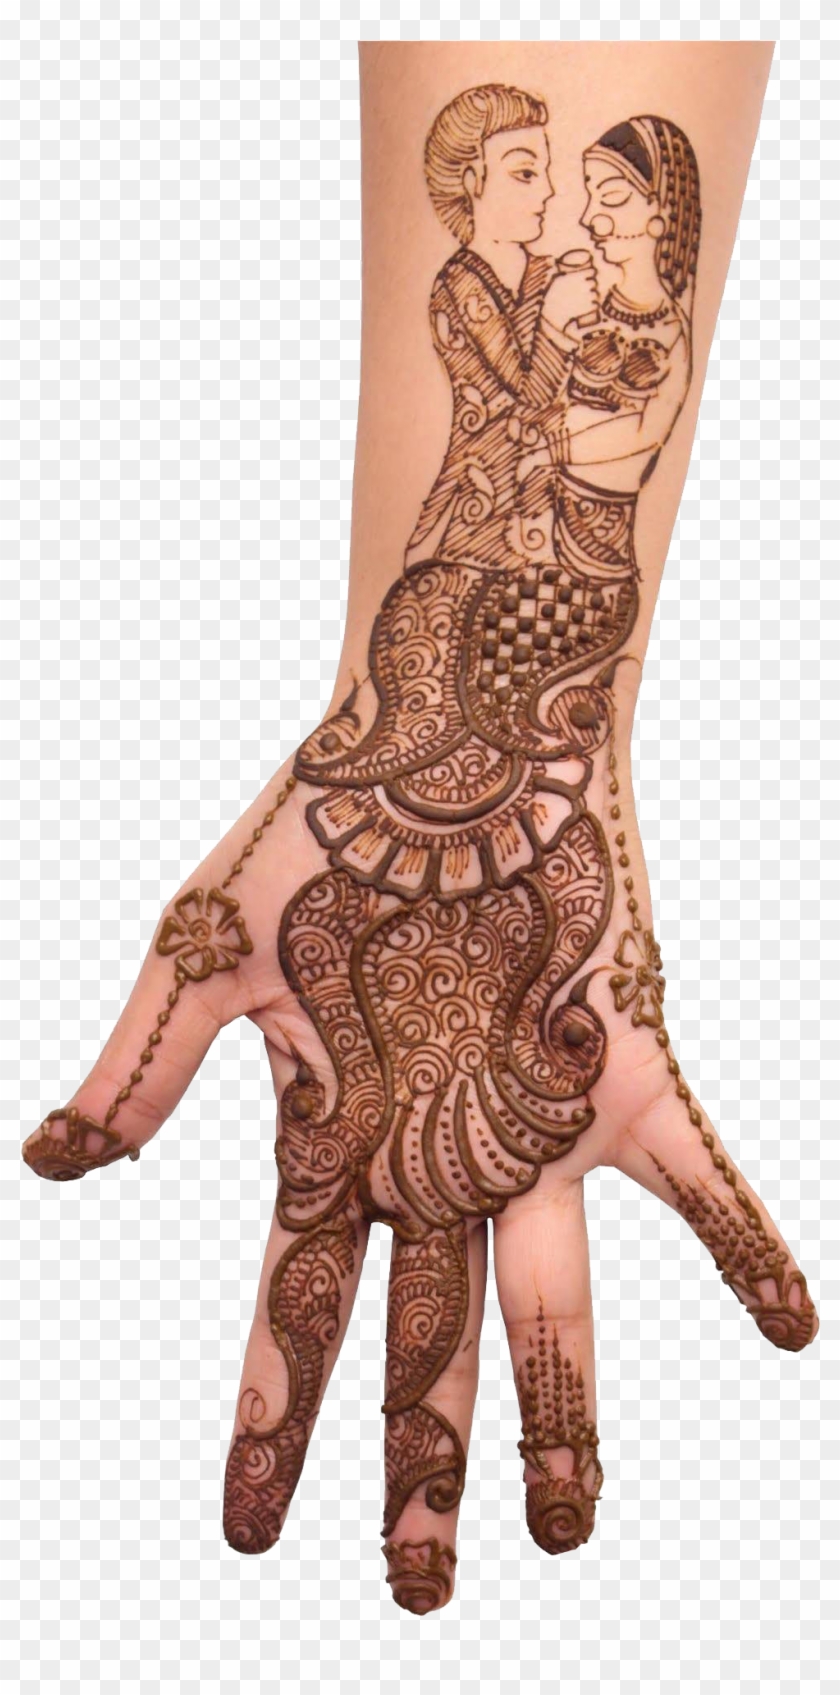 Latest Mehndi Designs For Karva Chauth Hd Png Download 1080x19 Pngfind